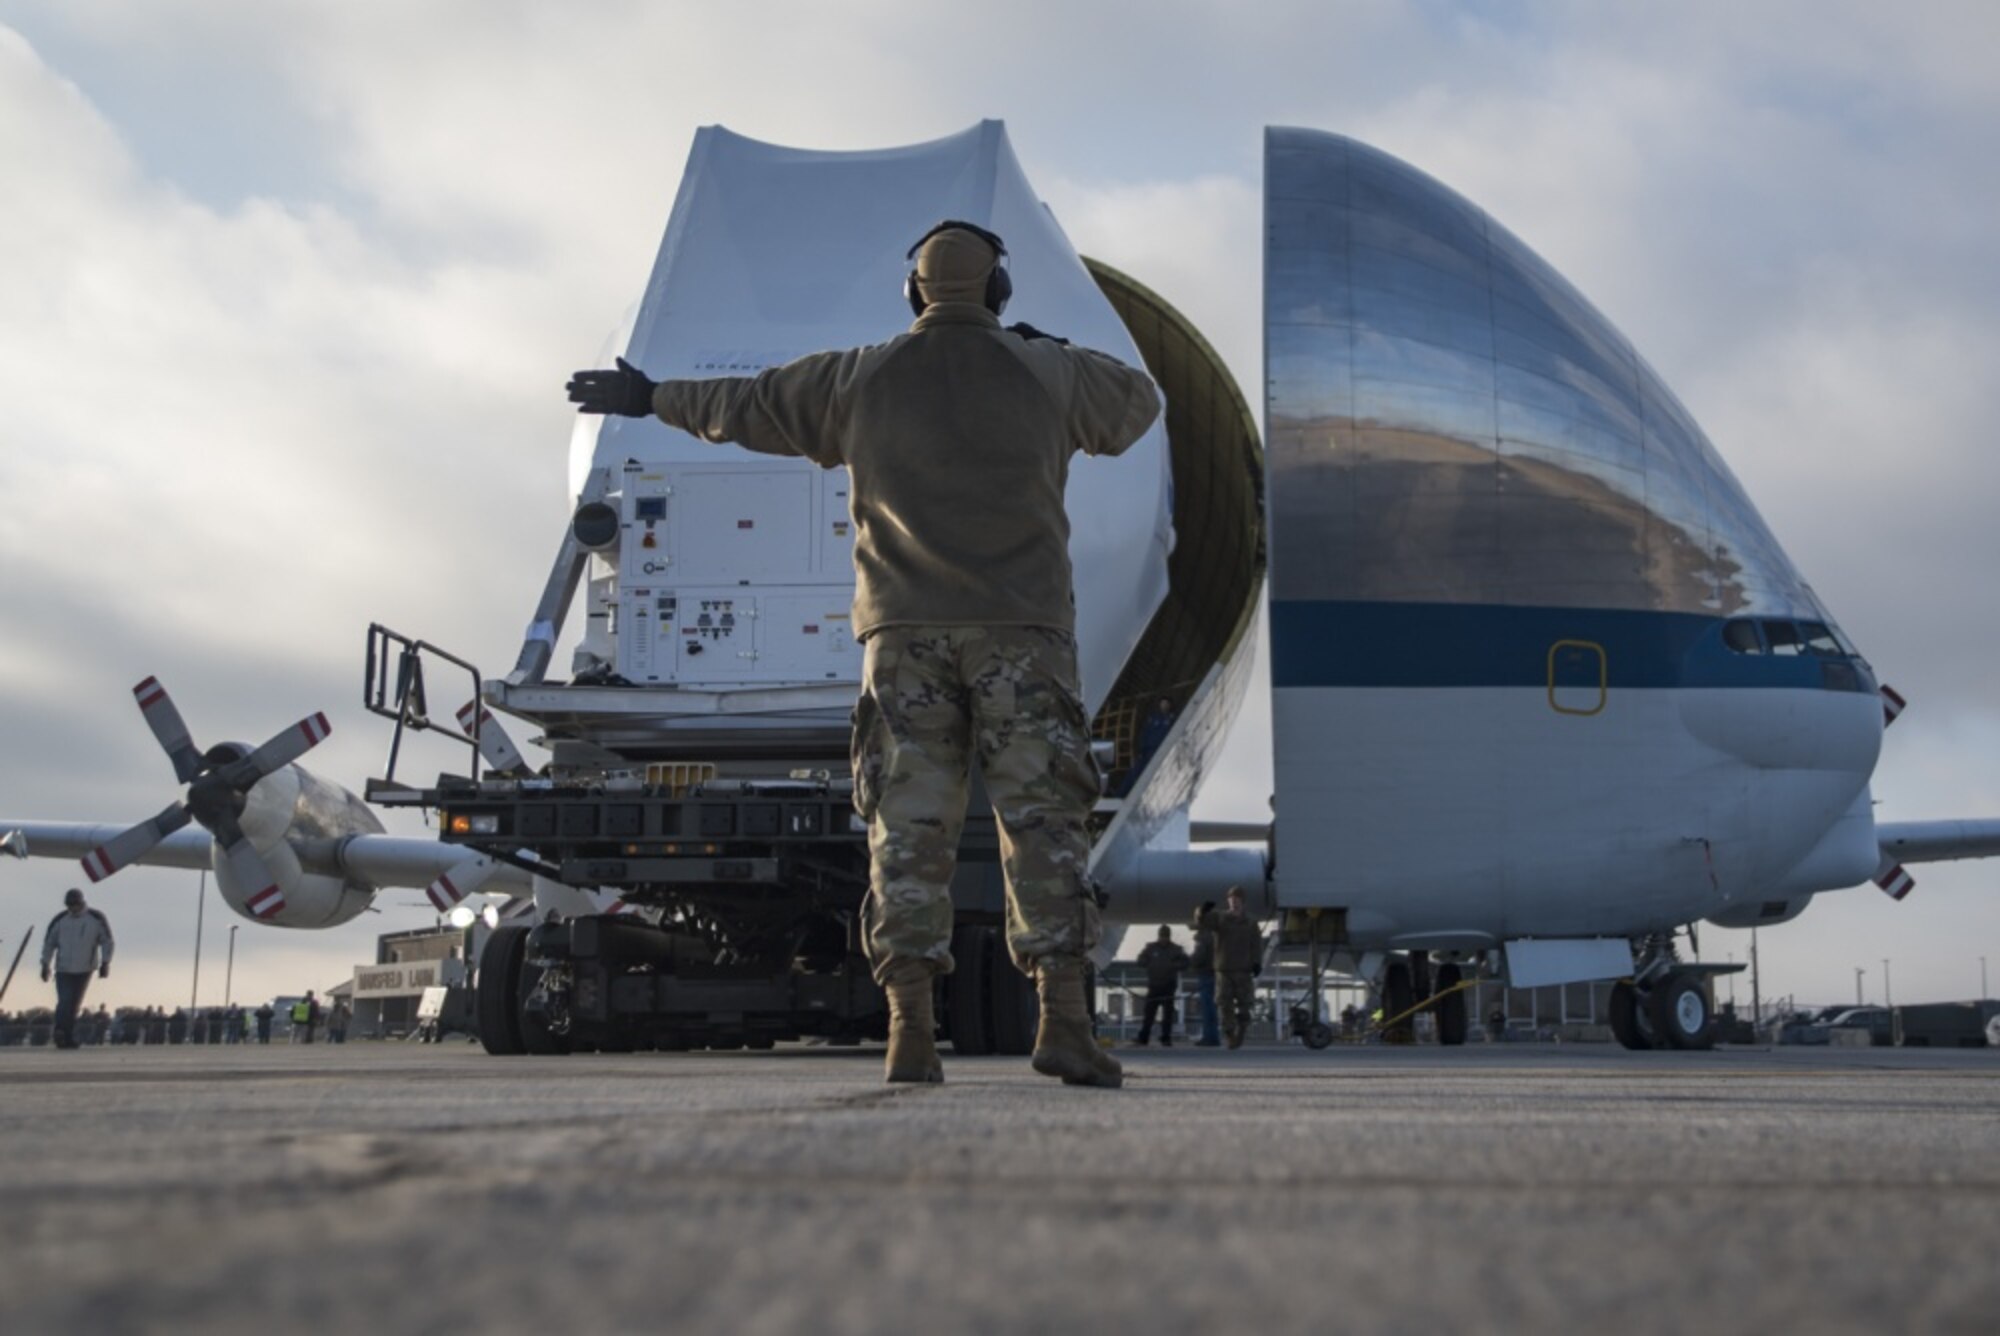 The NASA Super Guppy arrives at the 179th Airlift Wing, Ohio Air National Guard, in Mansfield, Ohio, Nov. 24, 2019. Airmen from the 179th AW assisted NASA by providing ground support during the unloading process. (U.S. Air National Guard photo by Tech. Sgt. Joe Harwood)